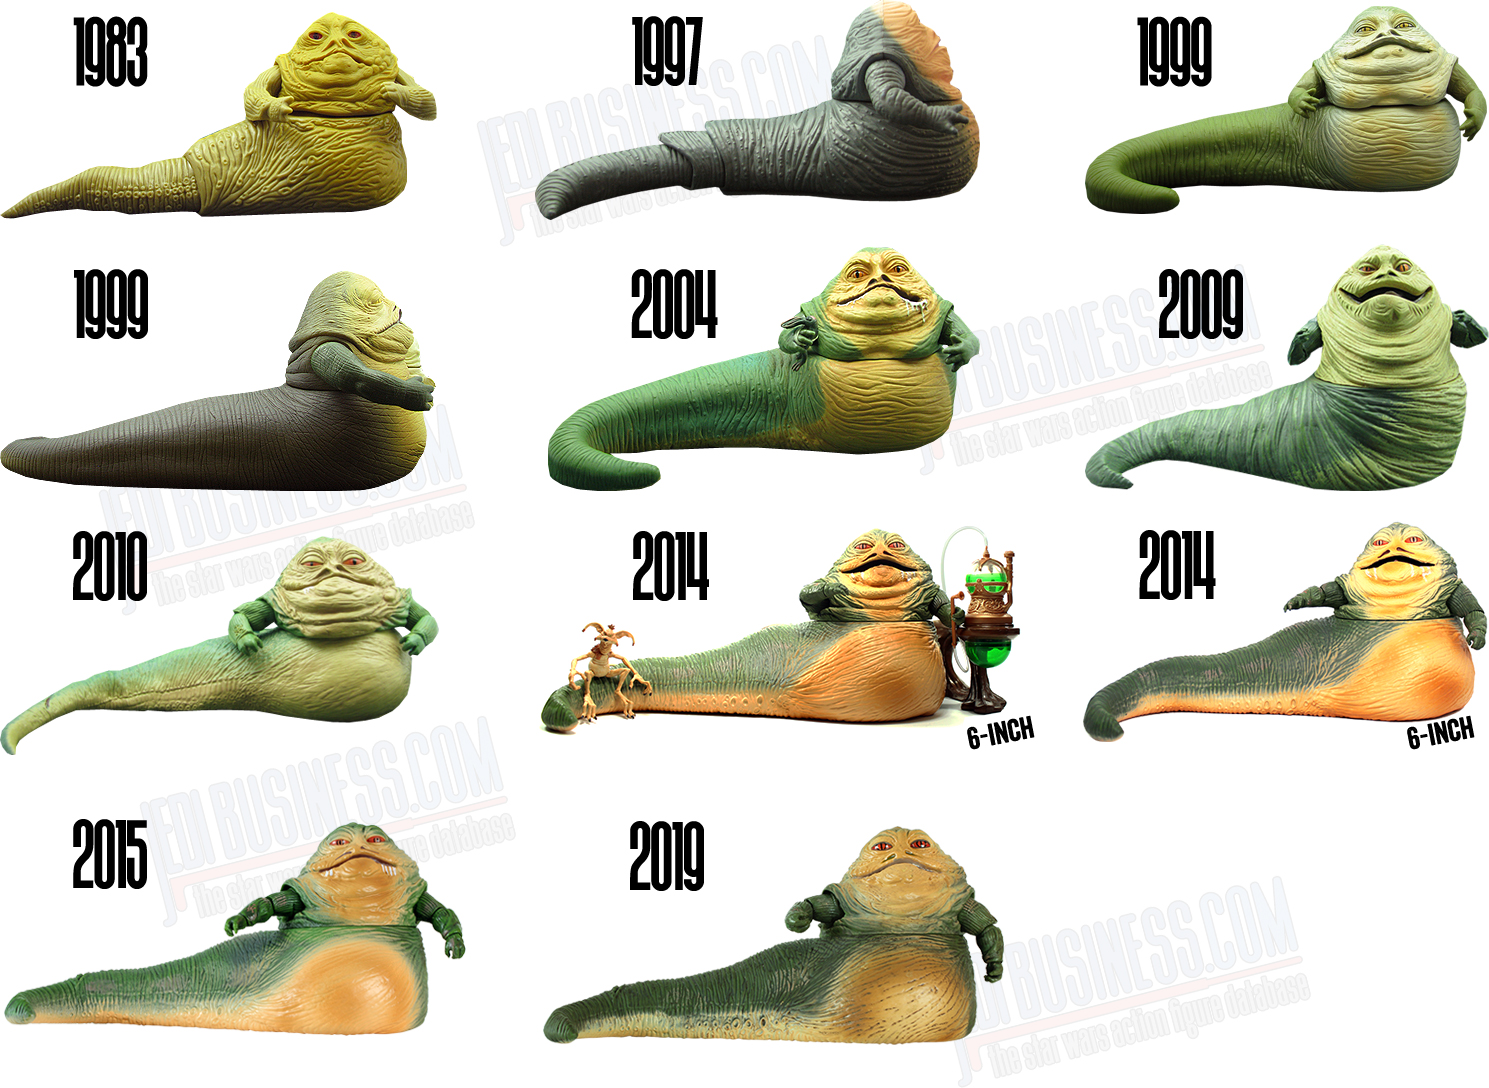 An Overview Of Jabba The Hutt Action Figures 1983 - 2019